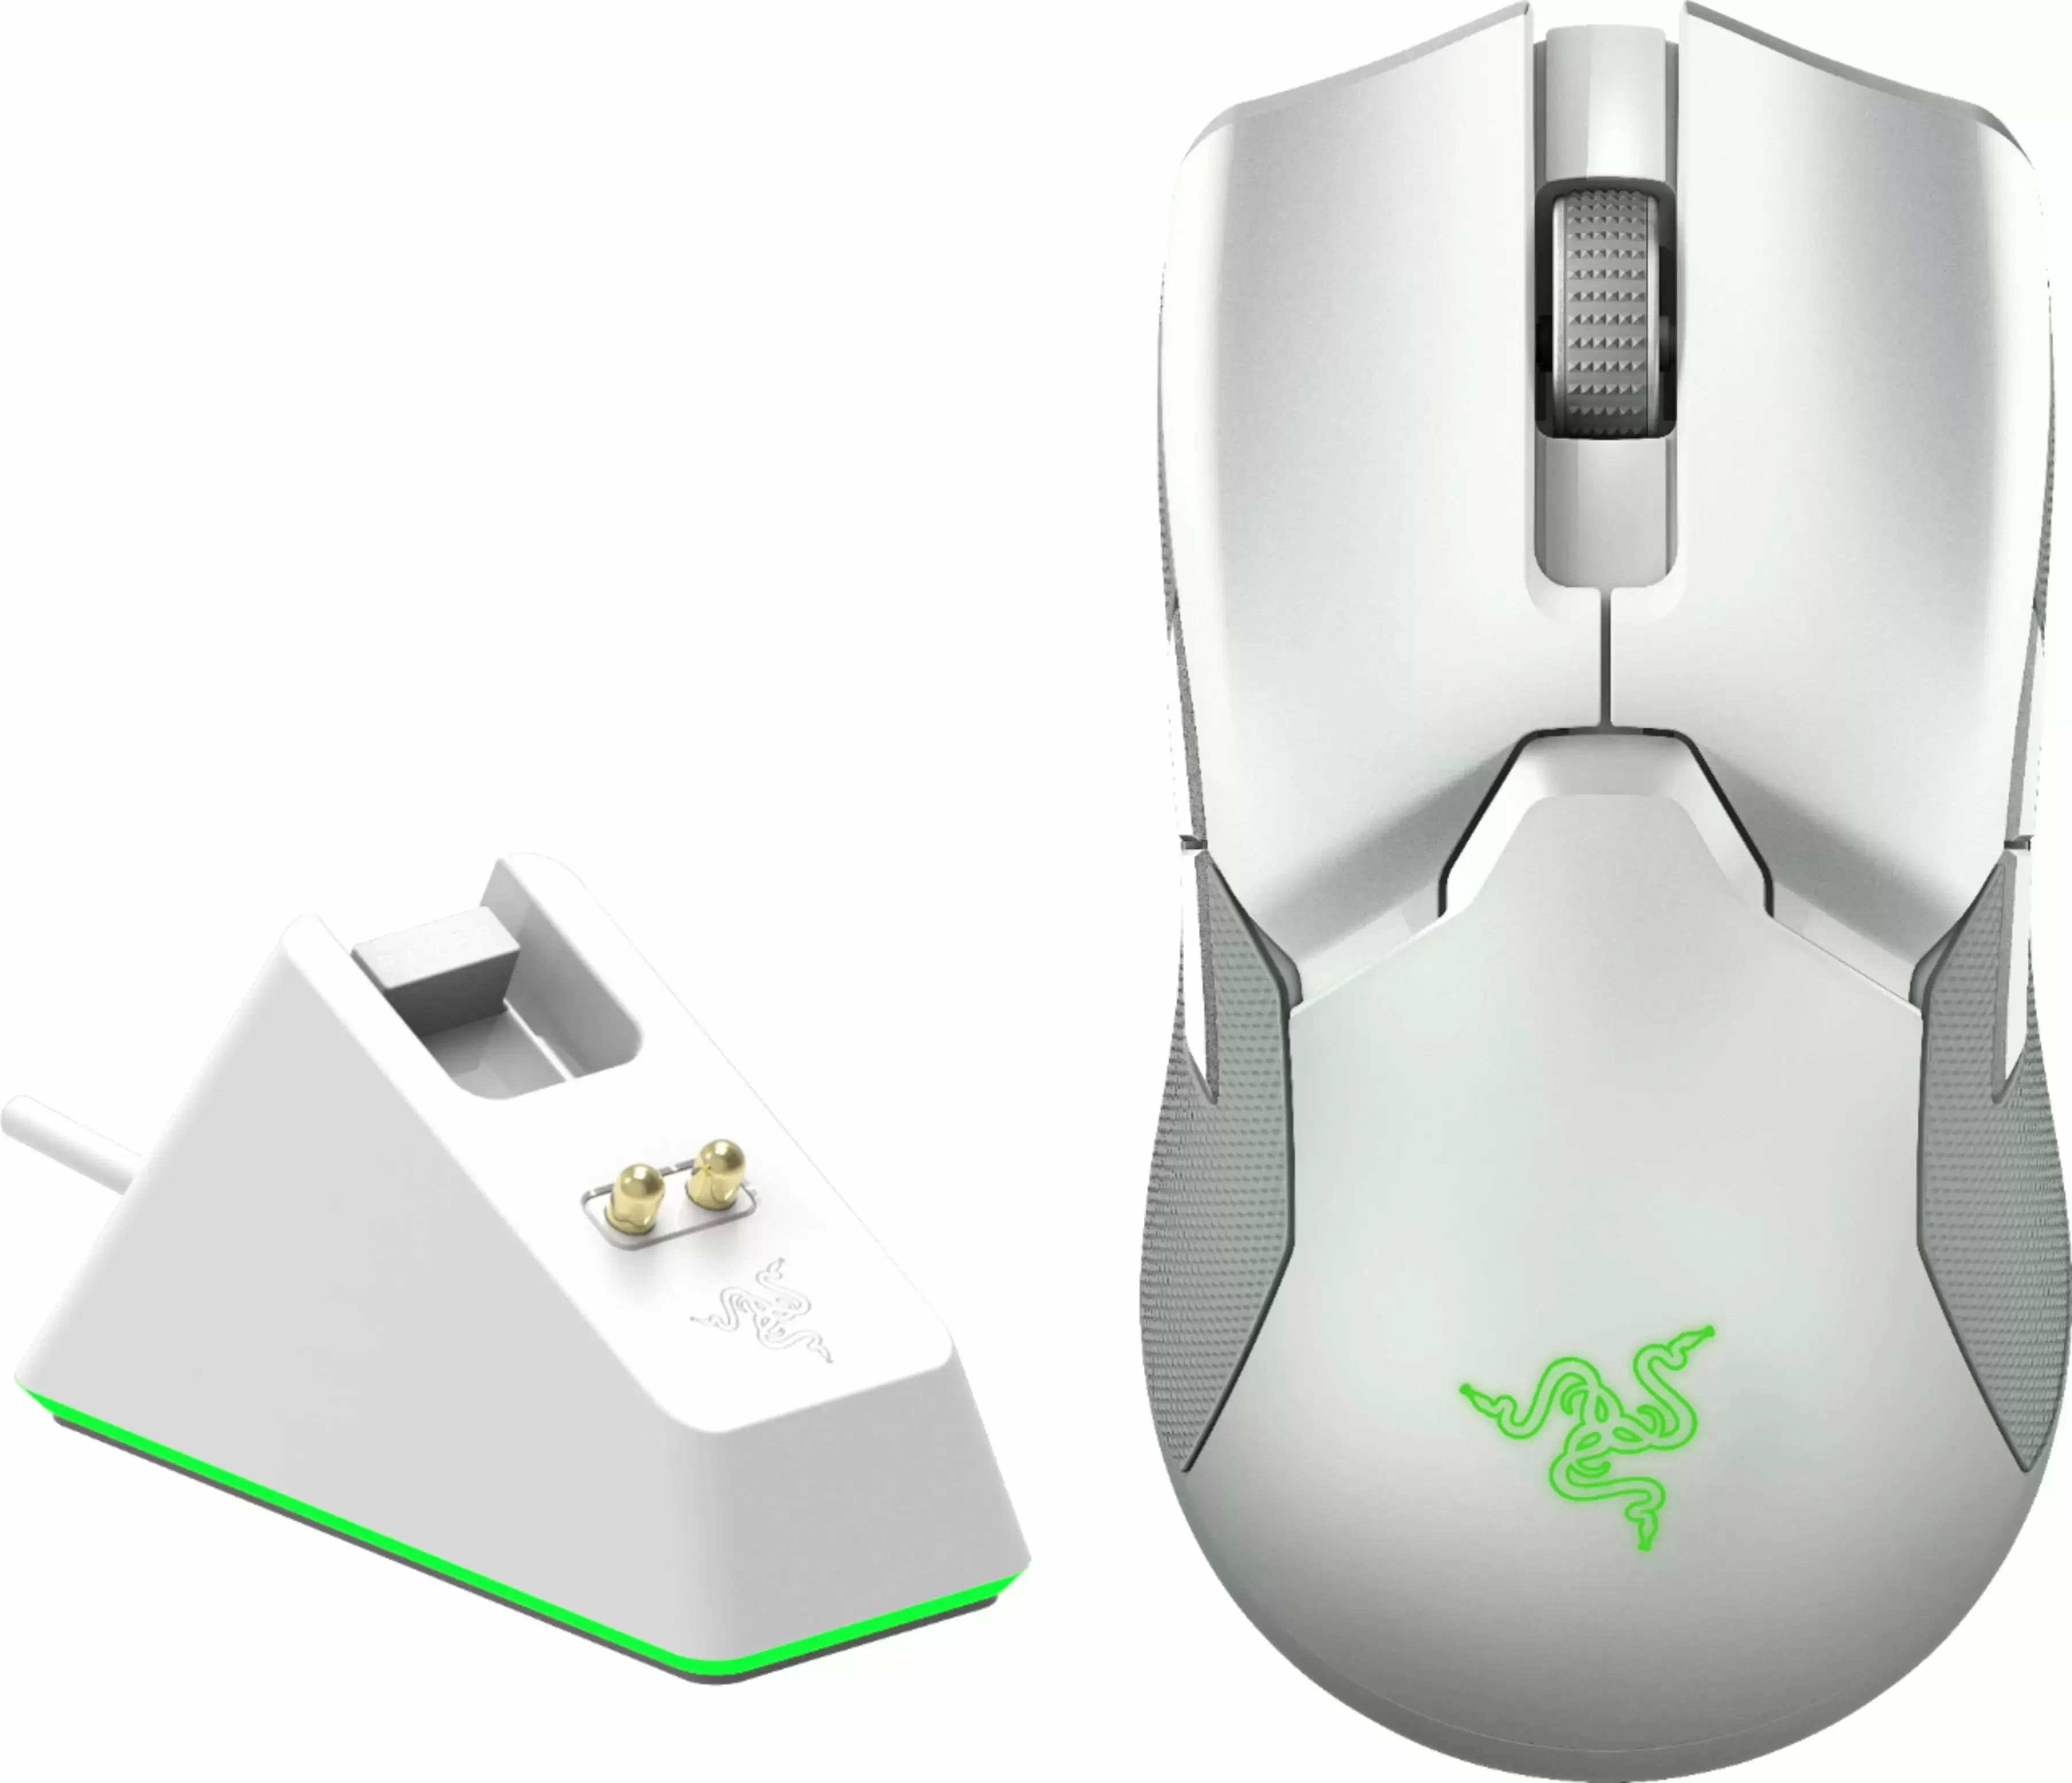 Razer Viper Ultimate Wireless Optical Gaming Mouse for $75.99 Shipped